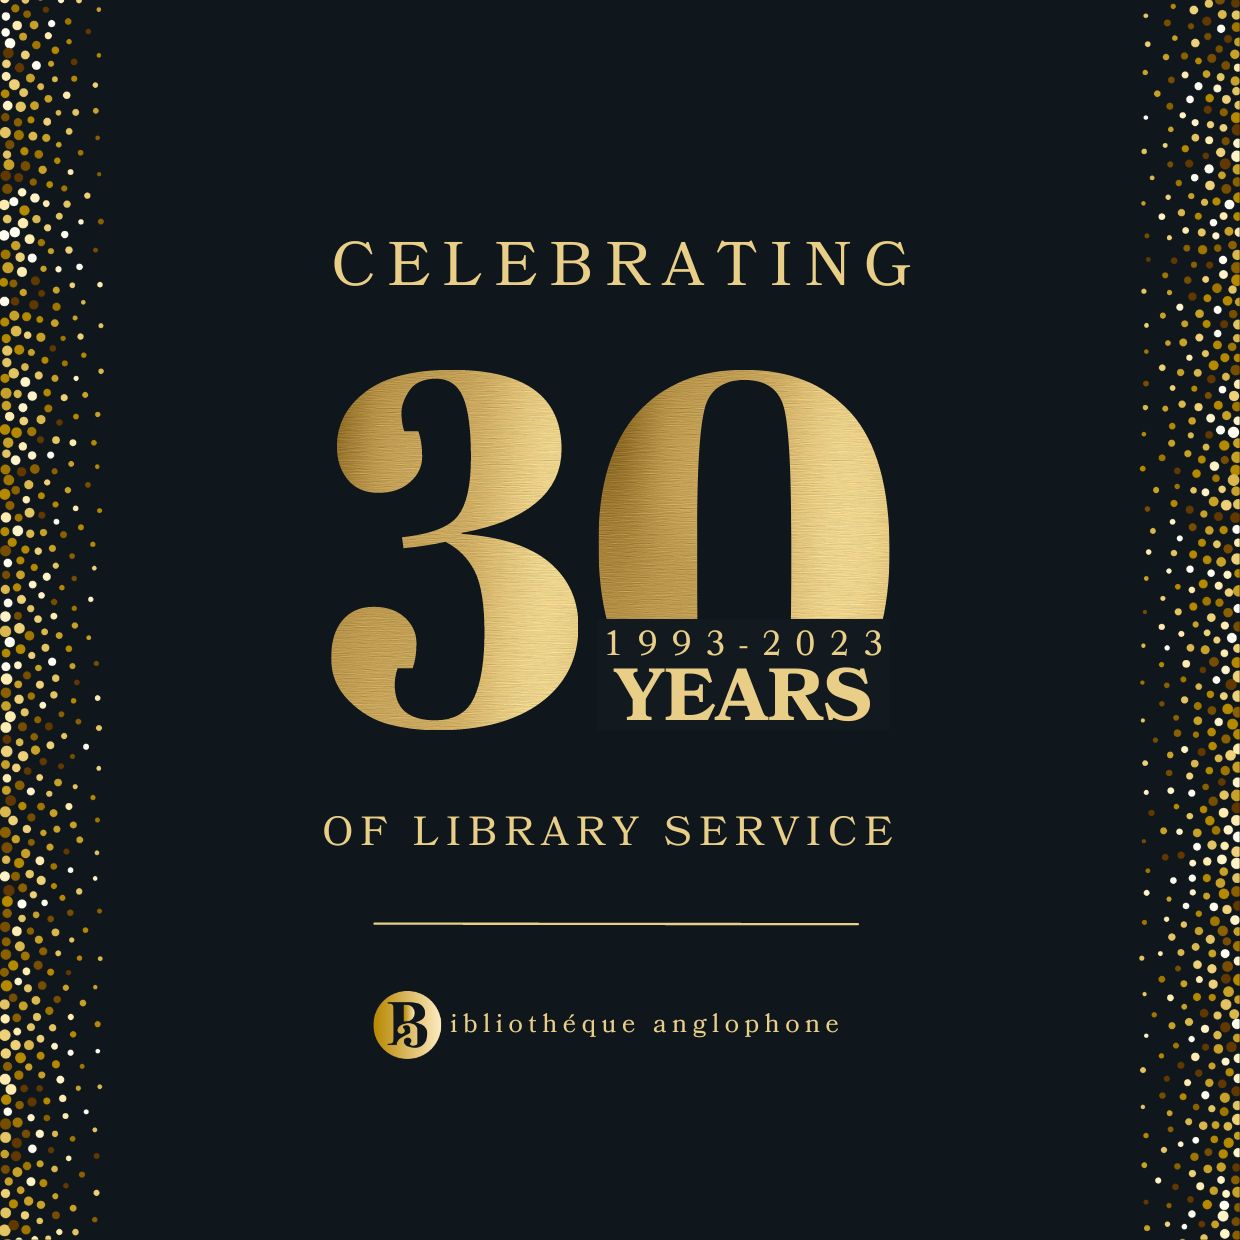 The library celebrates its 30th anniversary!